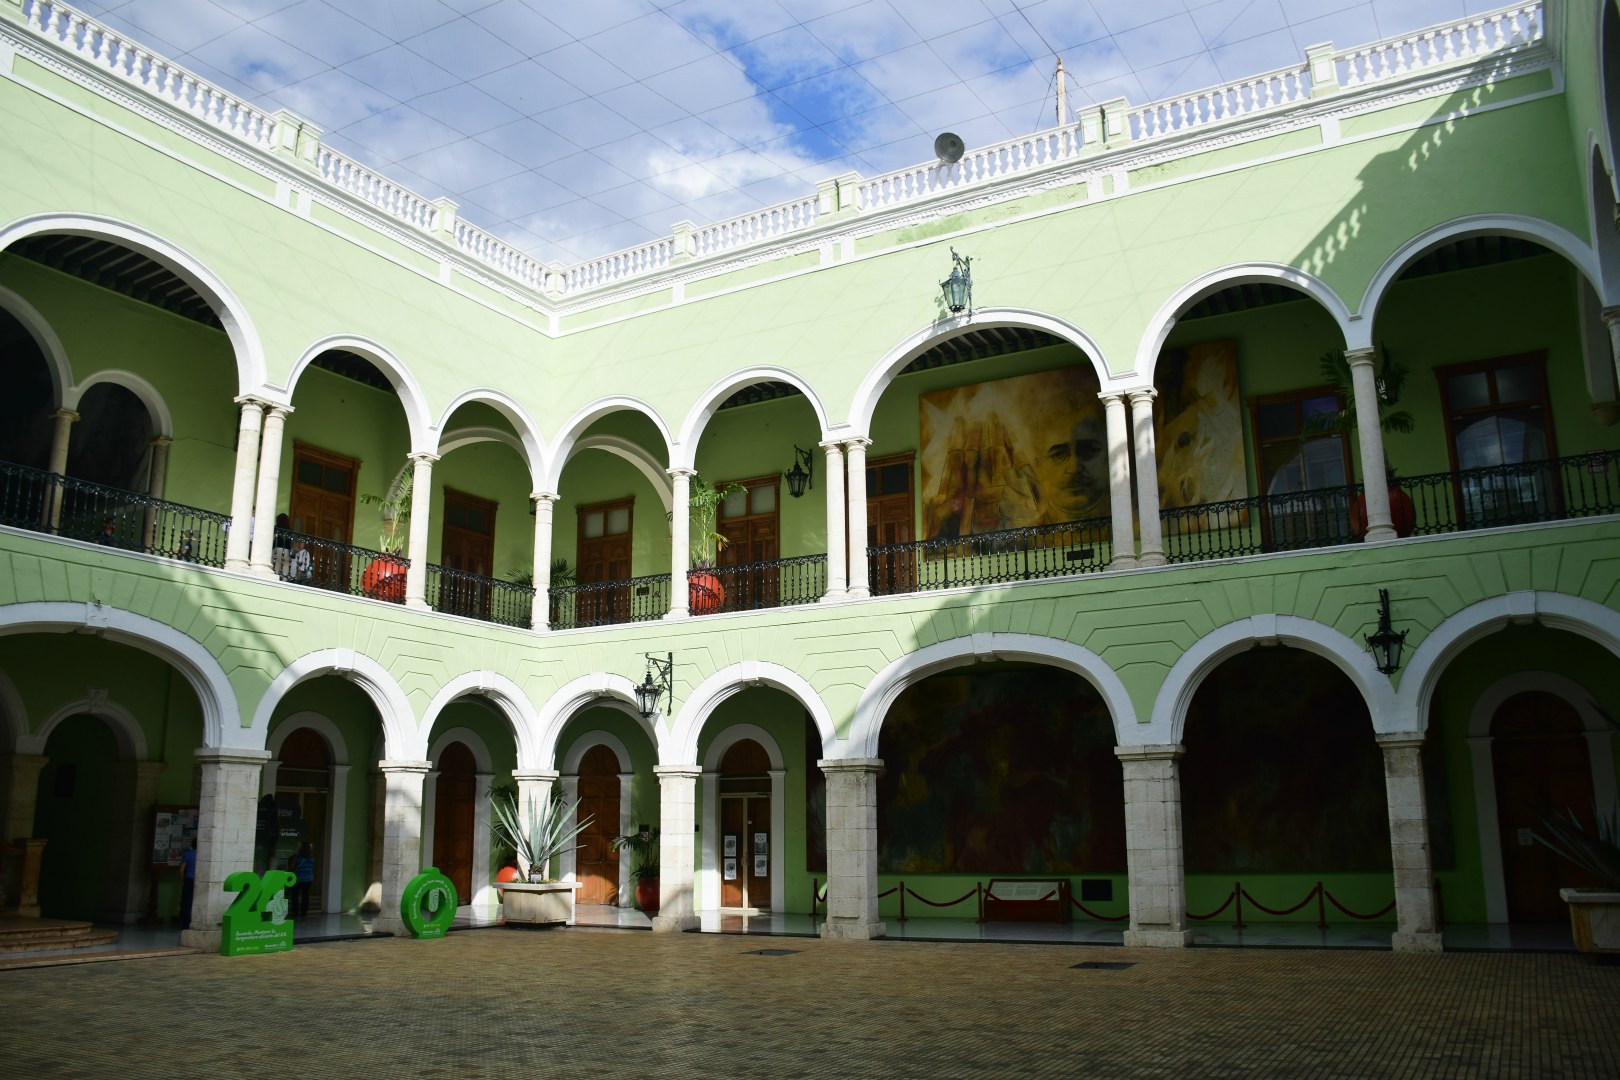 Courtyard of Governor's Palace, Merida, Mexico